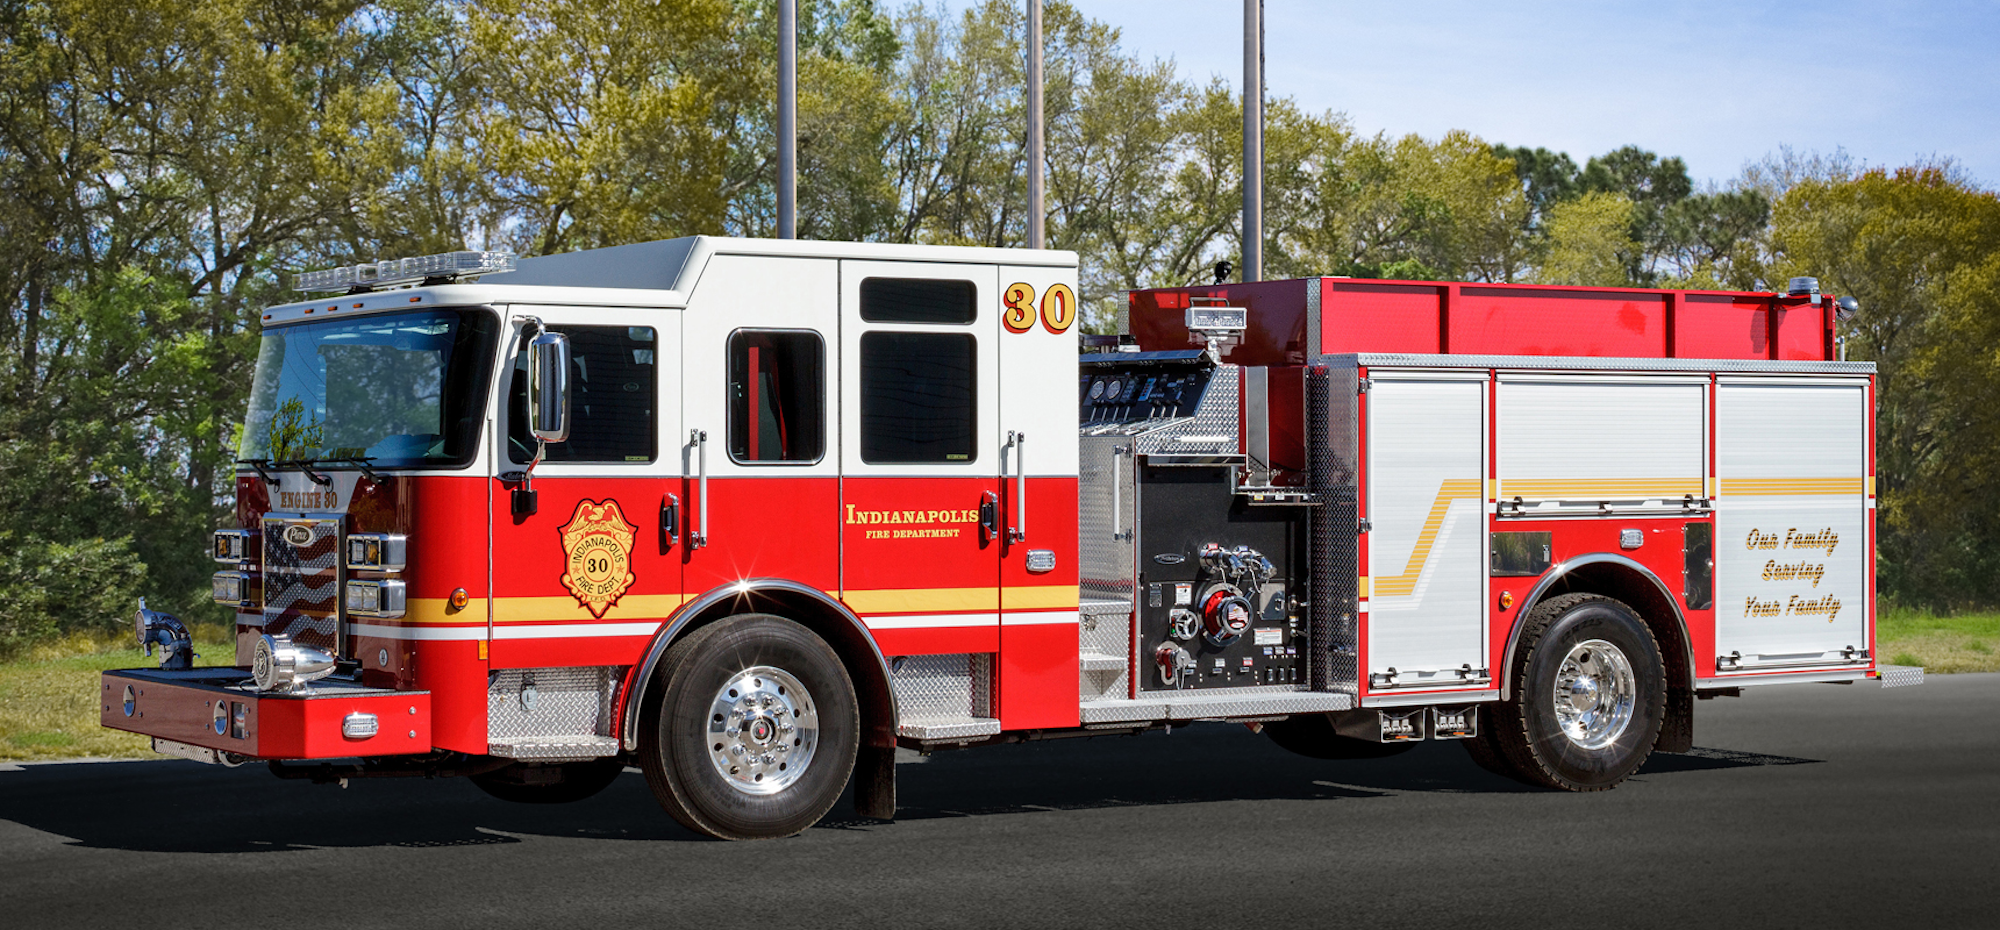 Pierce Secures Order for 11 Custom Fire Apparatus for the Indianapolis